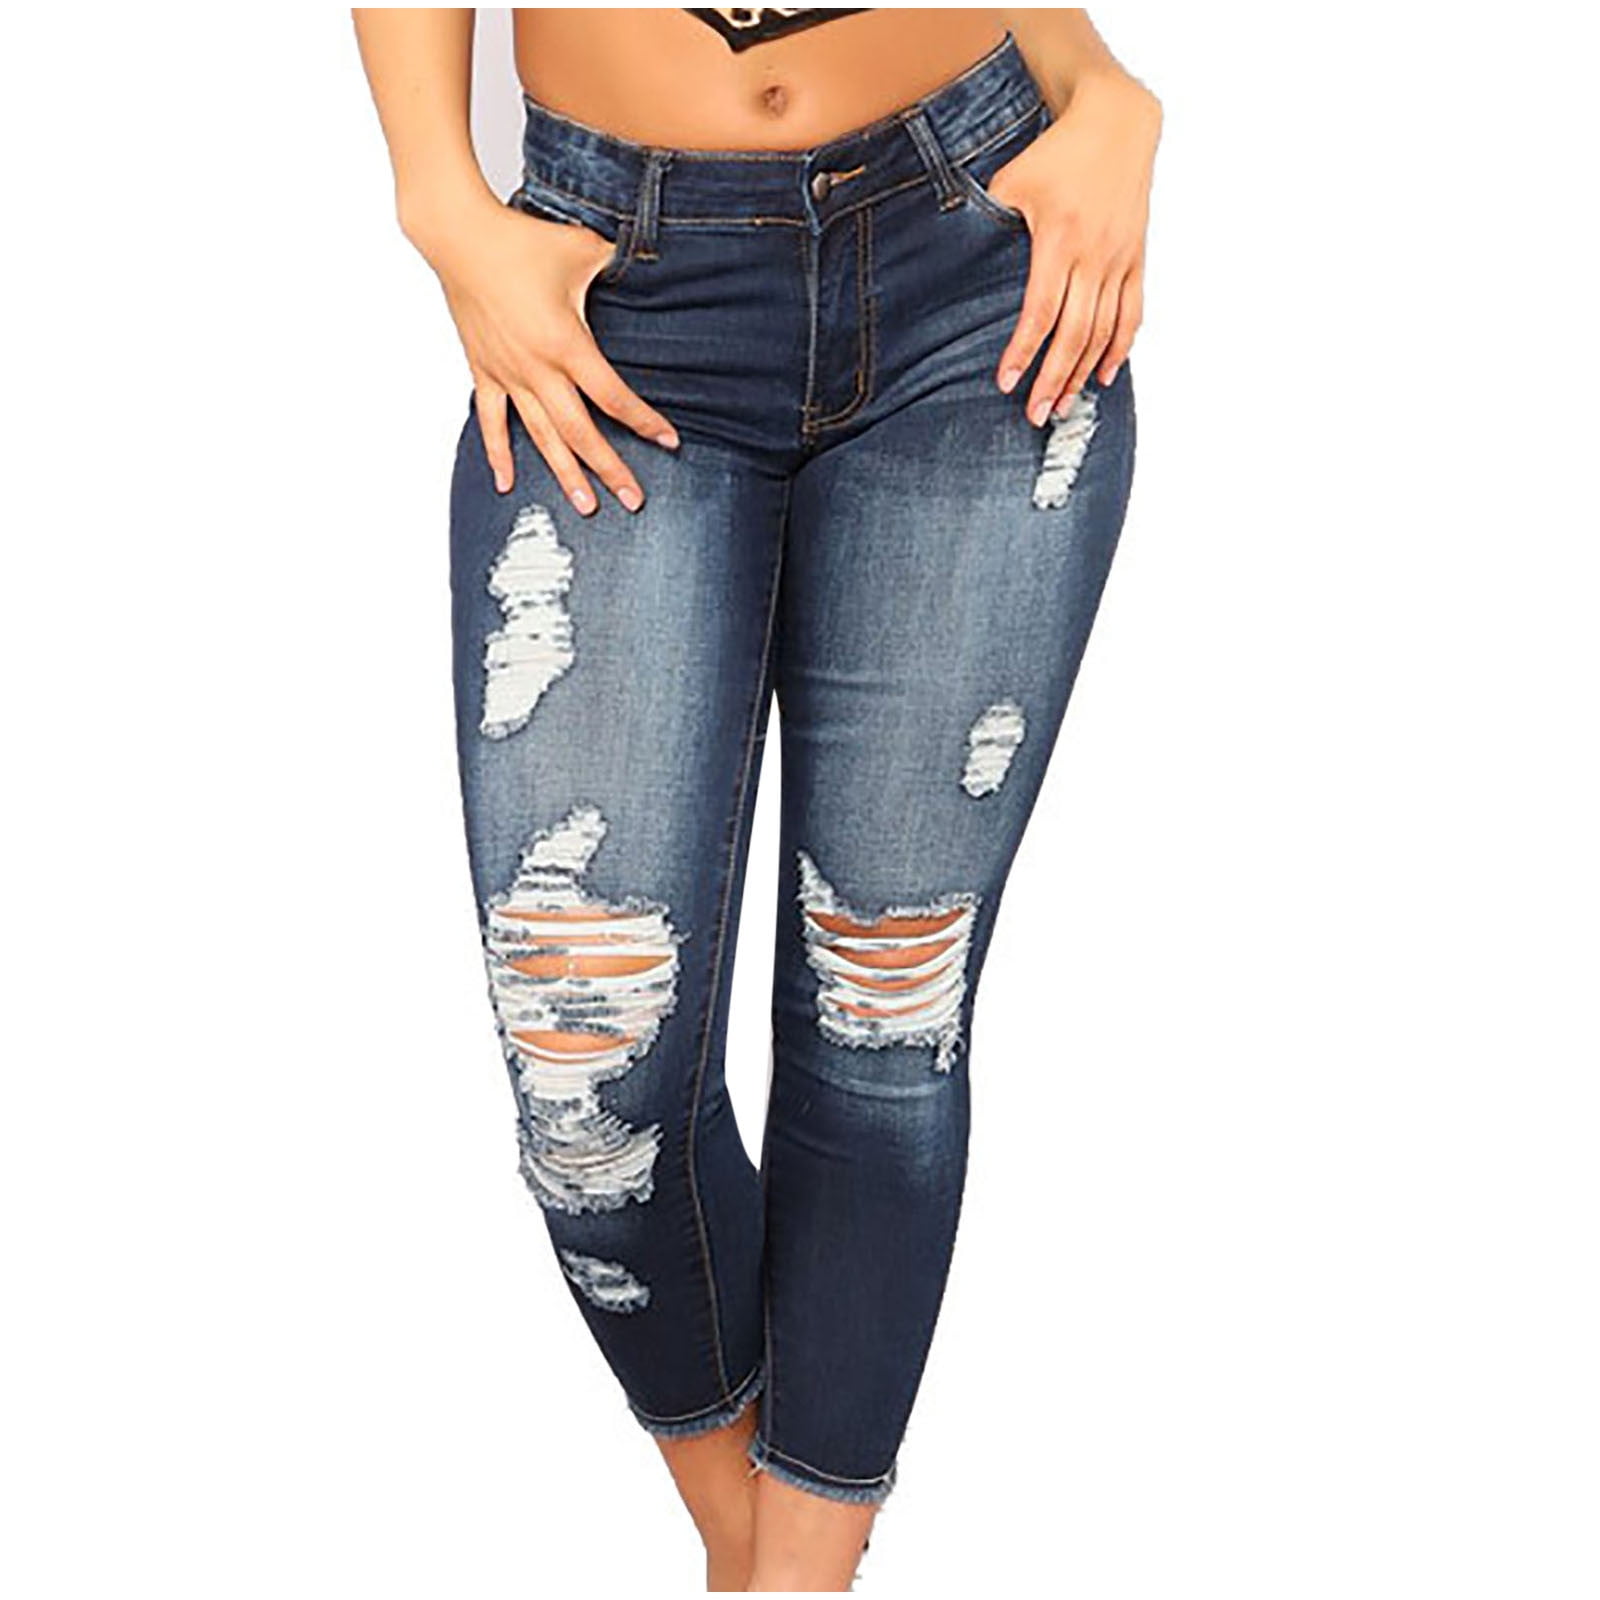 YYDGH Women Skinny Ripped Jeans Stretch Distressed Destroyed Denim Pants  Dark Blue XL 